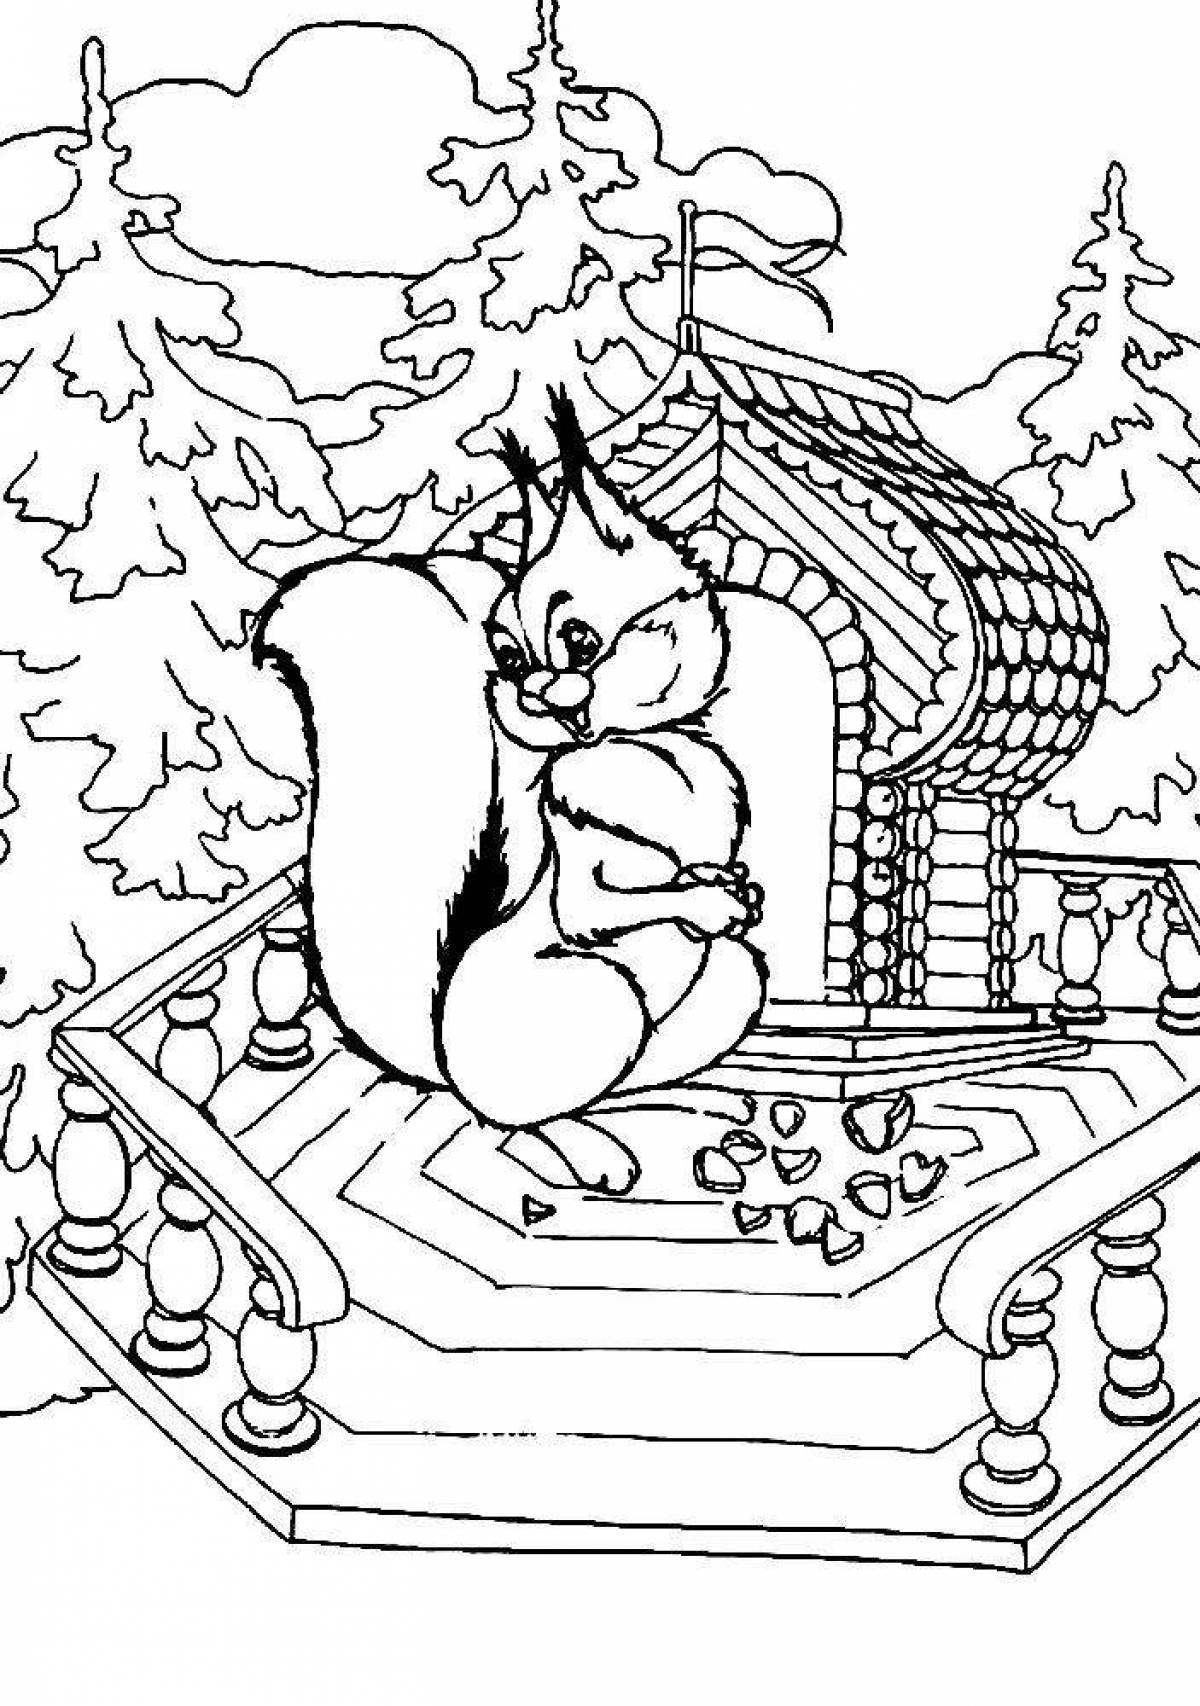 Fairytale coloring book for the tale of Tsar Saltan